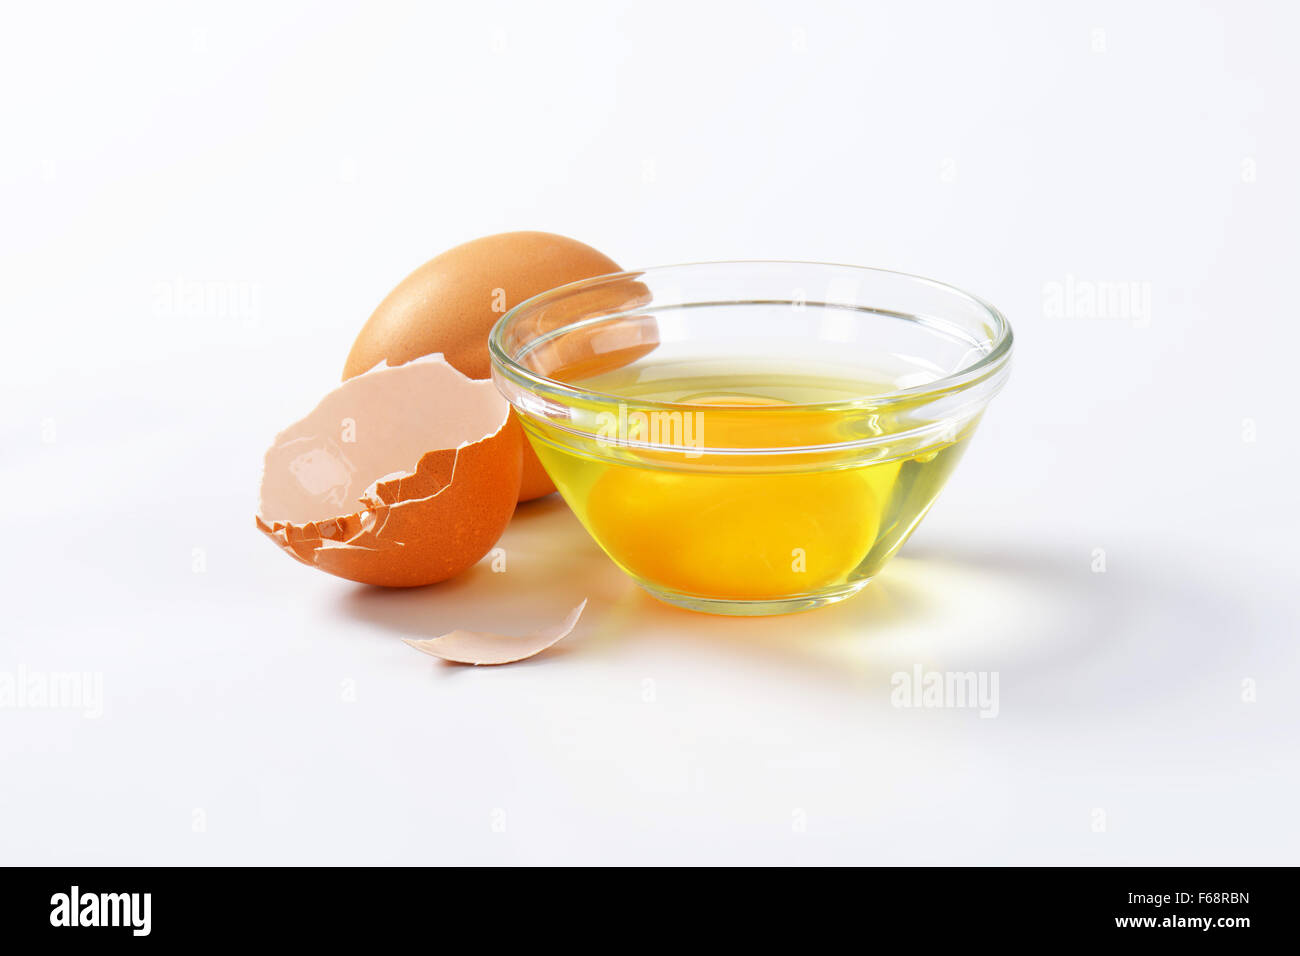 Fresh egg white and yolk in glass bowl, whole egg and eggshell Stock Photo